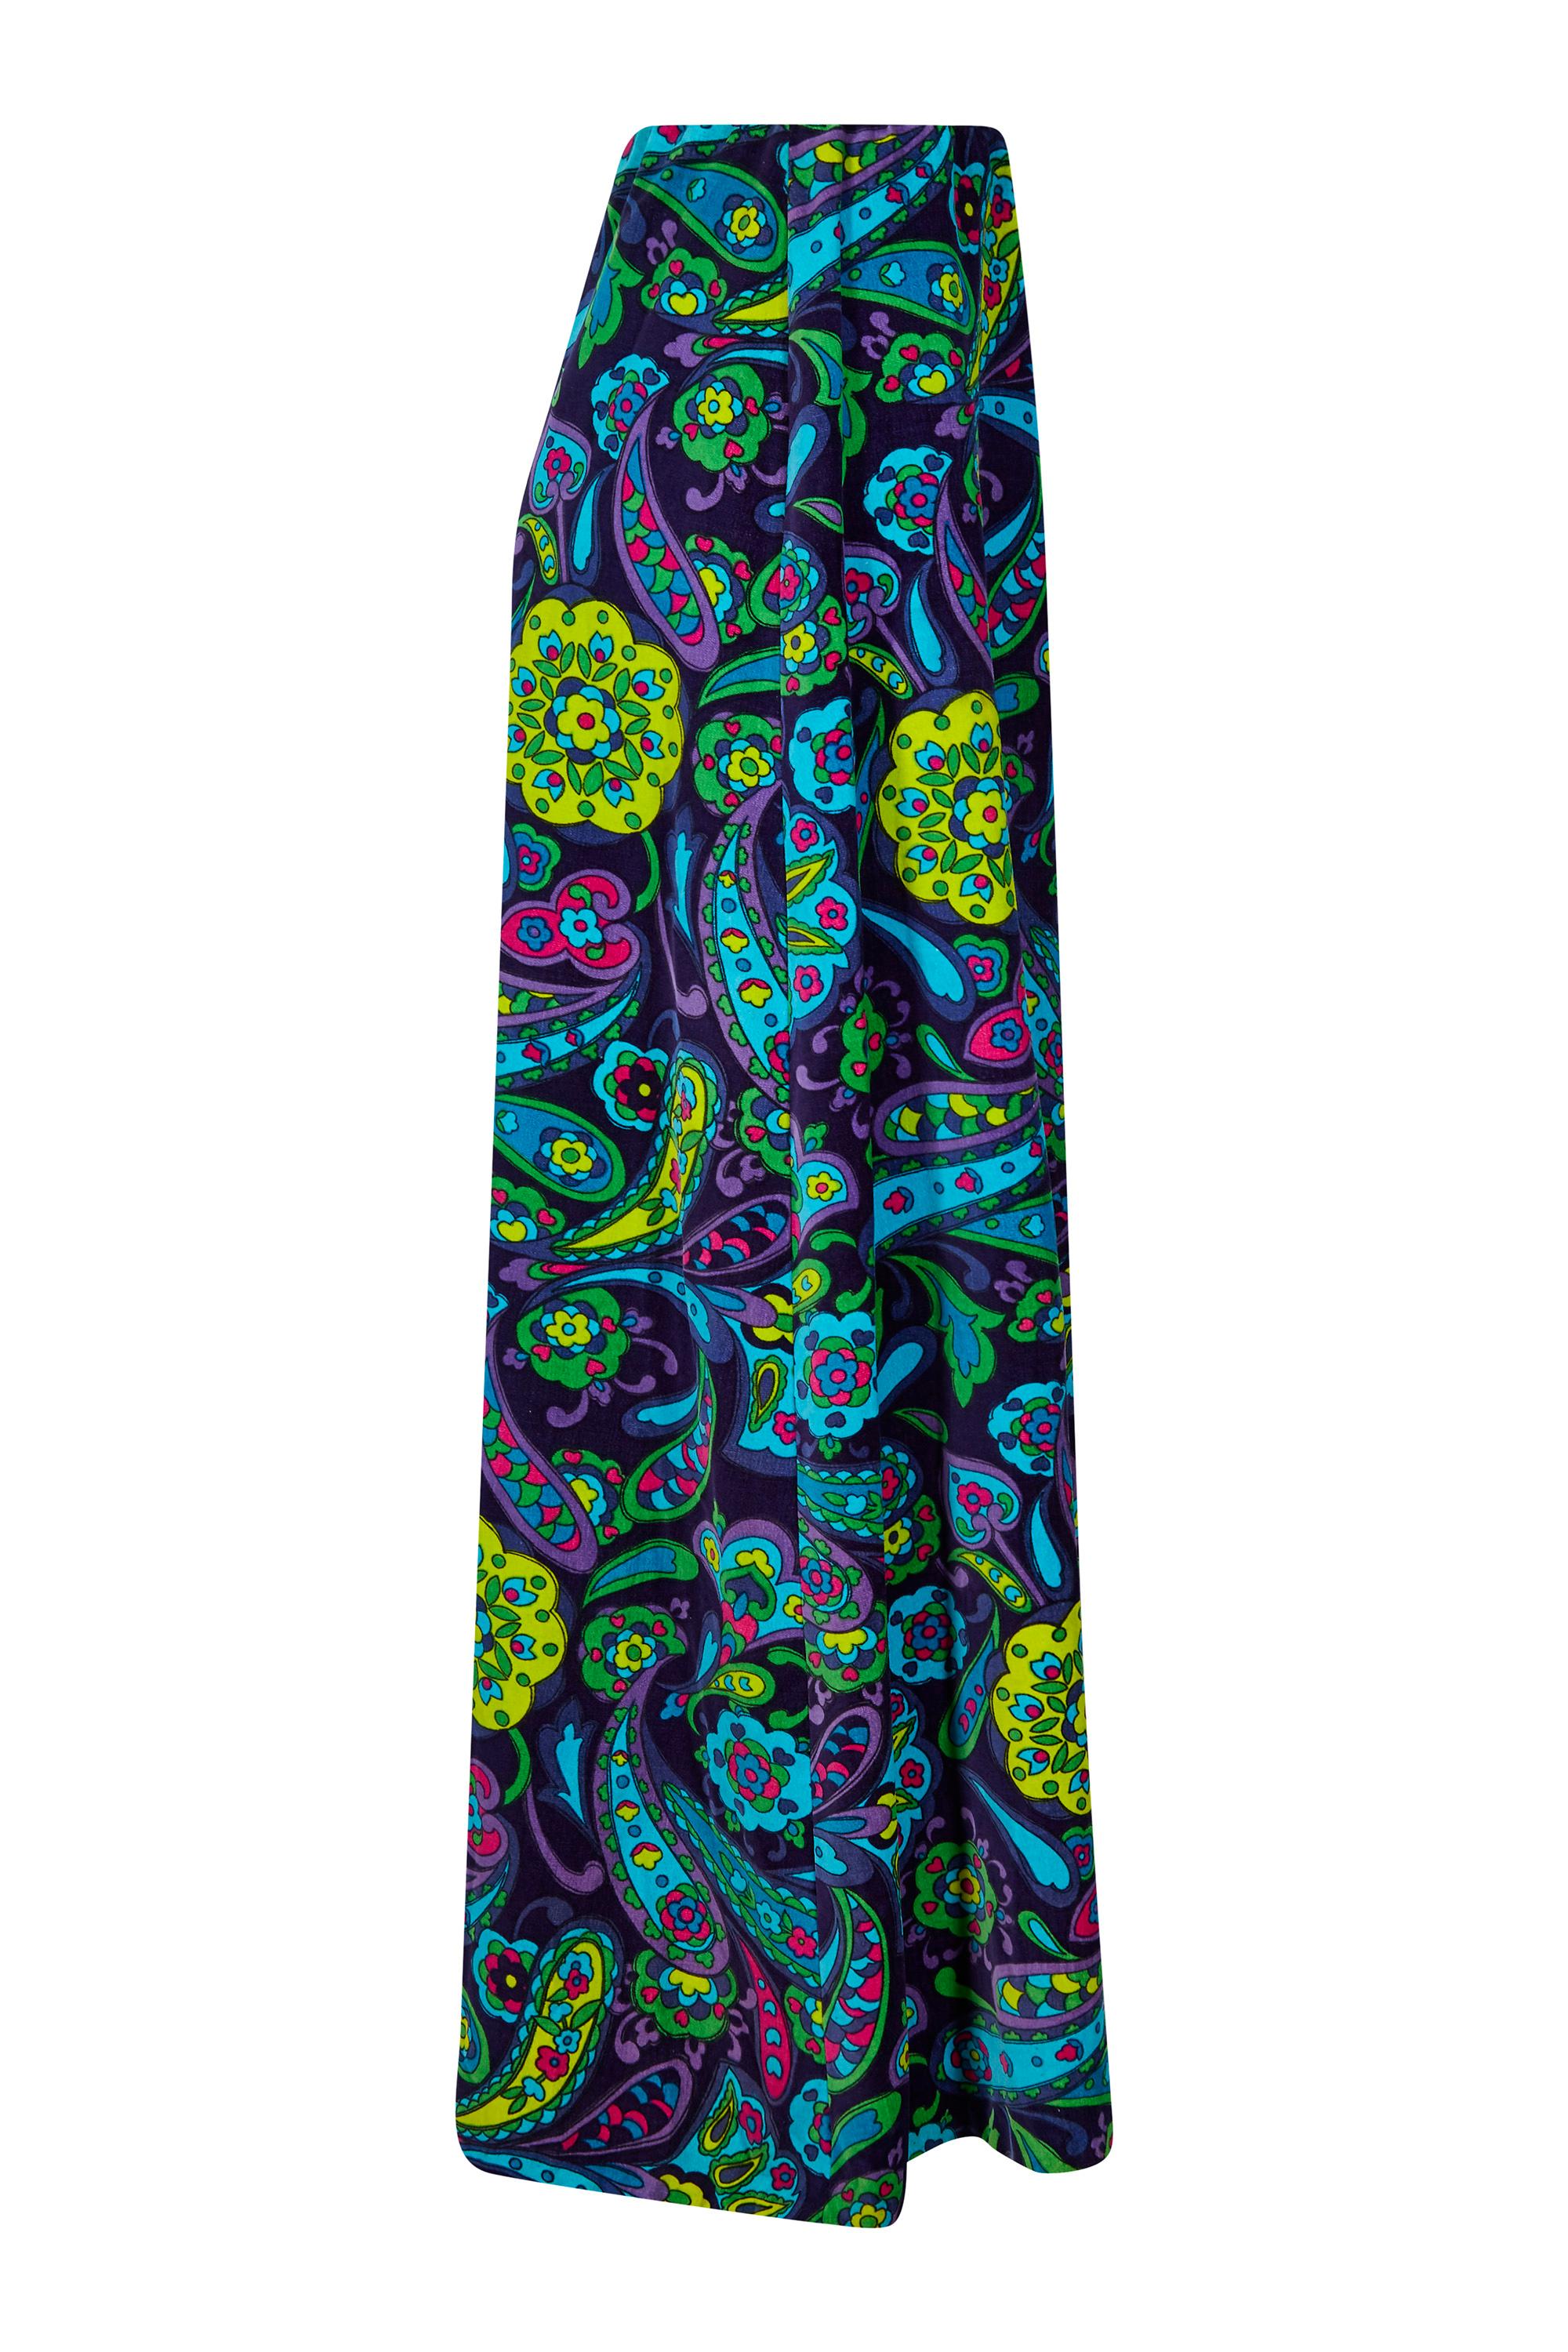 1960s Psychedelic Paisley Print Velvet Maxi Skirt and Top Ensemble For Sale 3